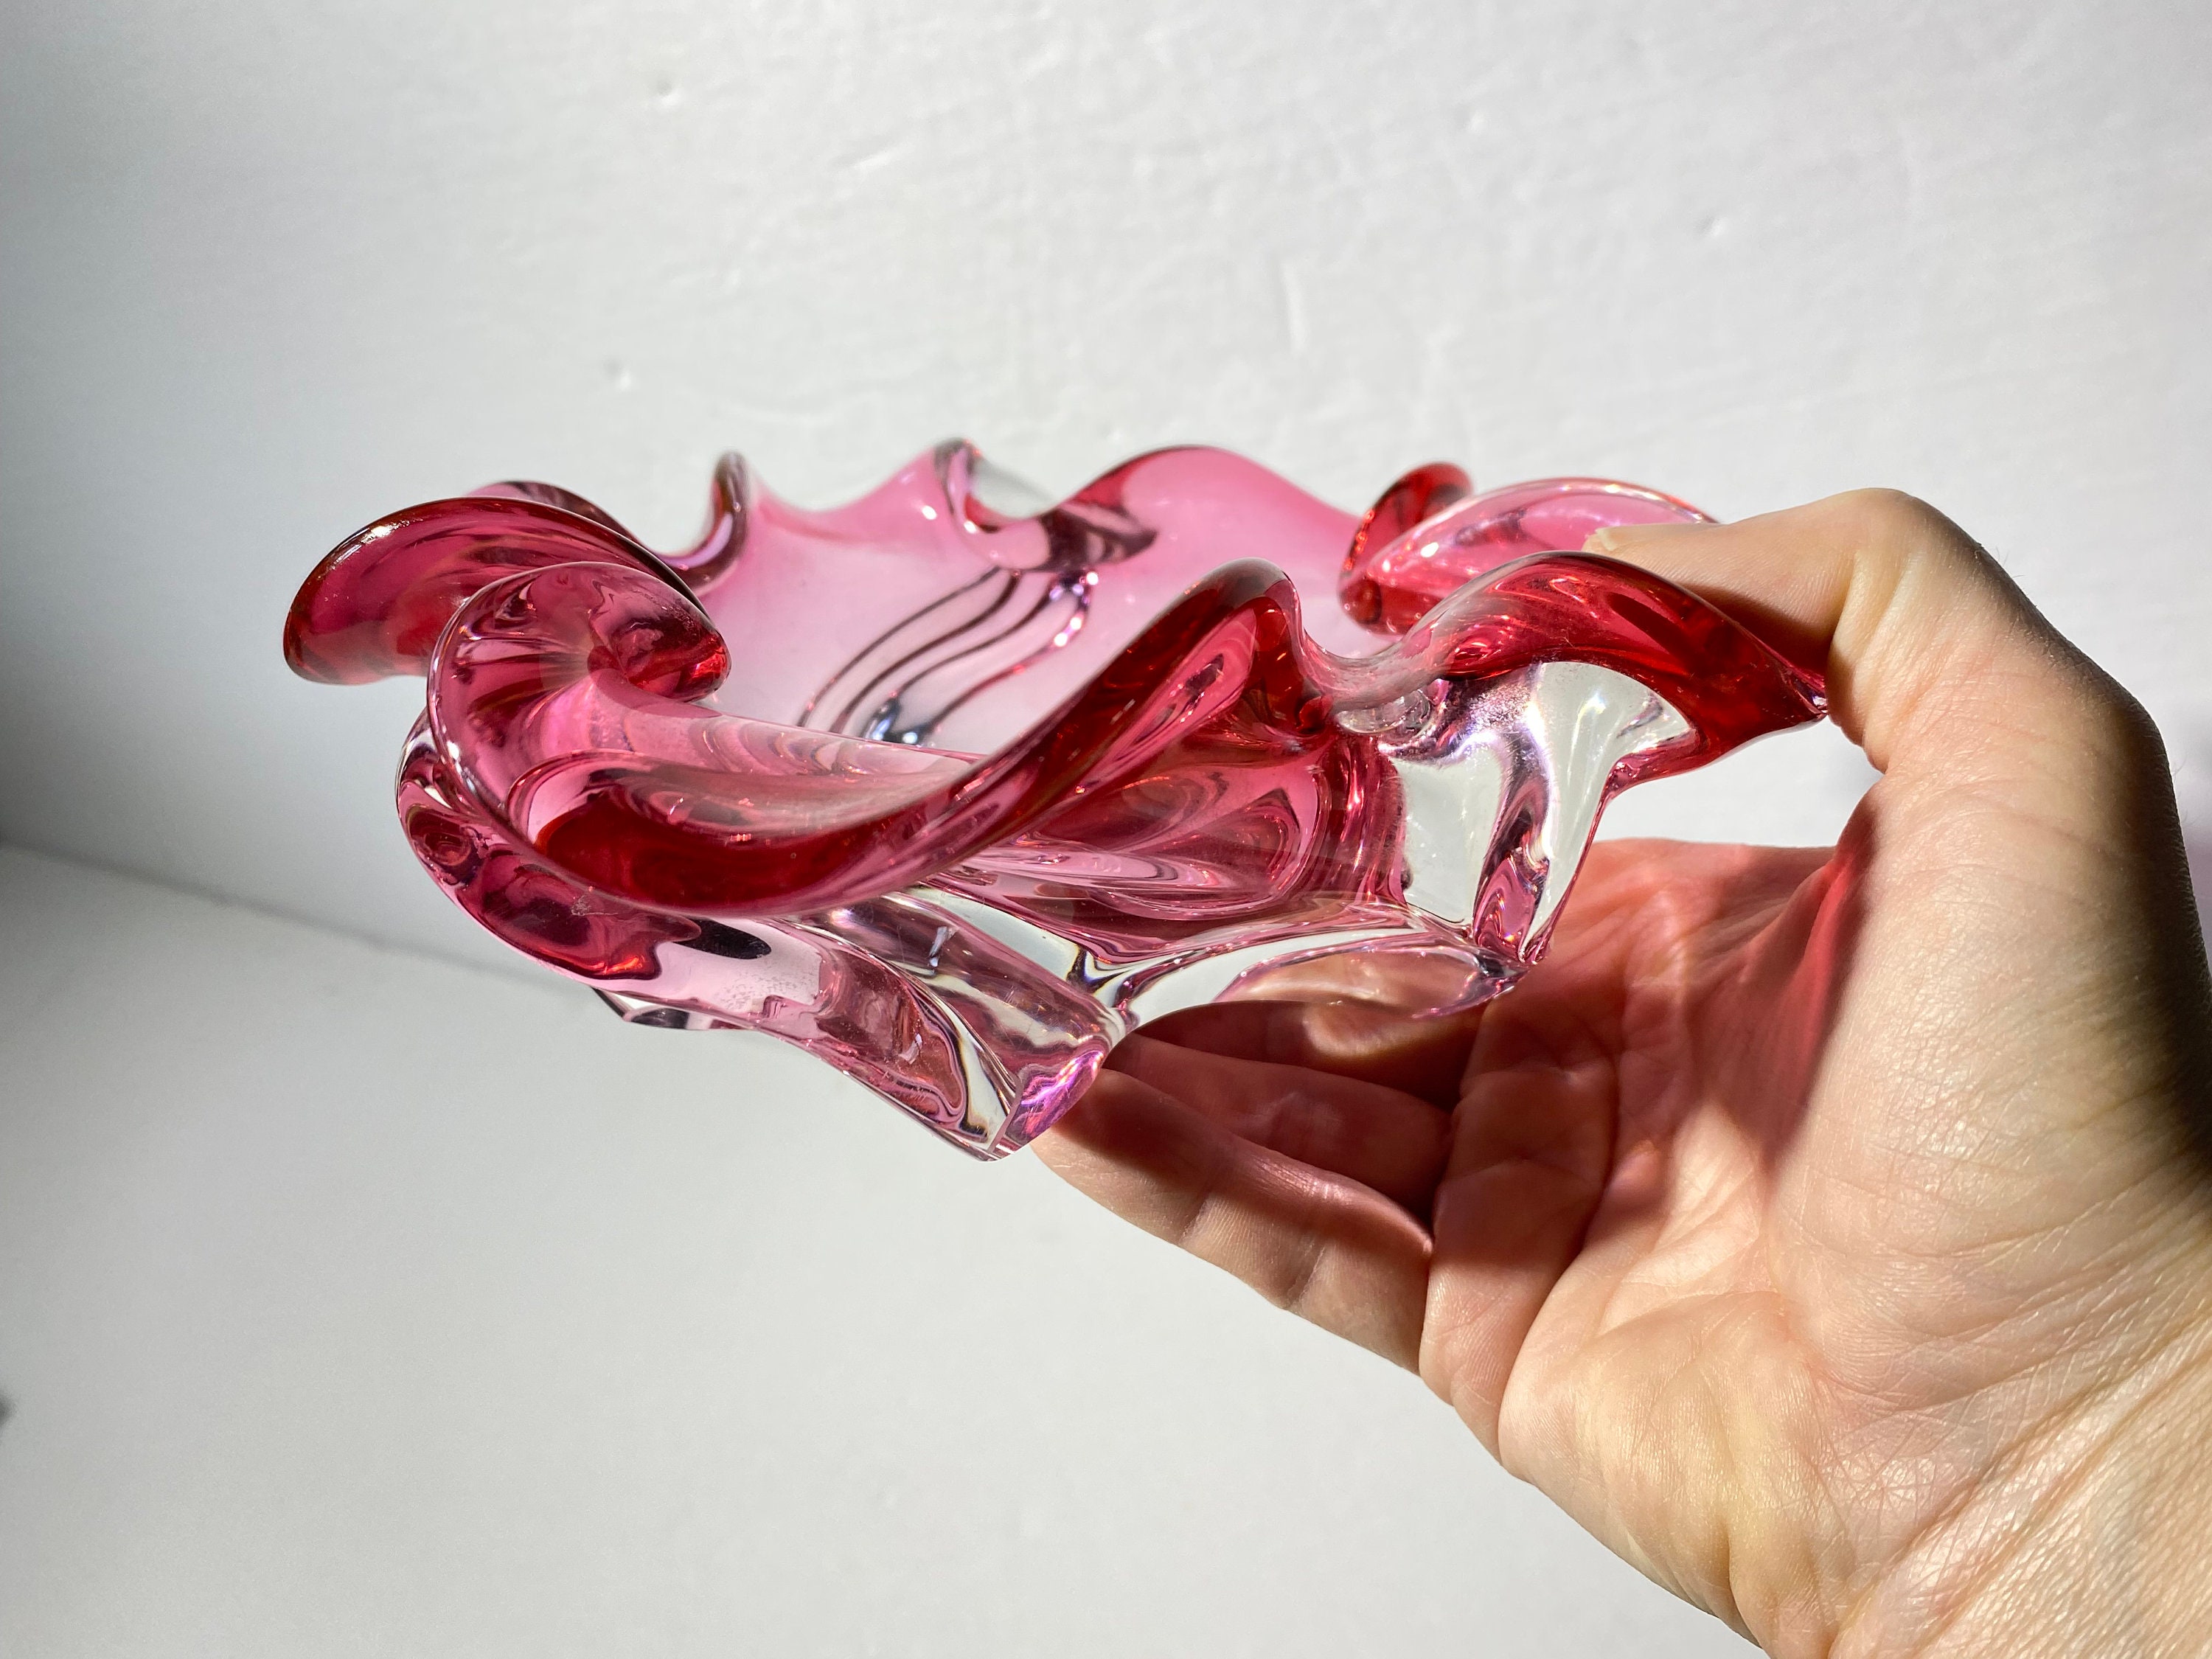 ashtray bowl Glass flower shaped pink heavy glass Murano floraform,Sommerso,cranberry,art glass handblown Italy,floral shape clear